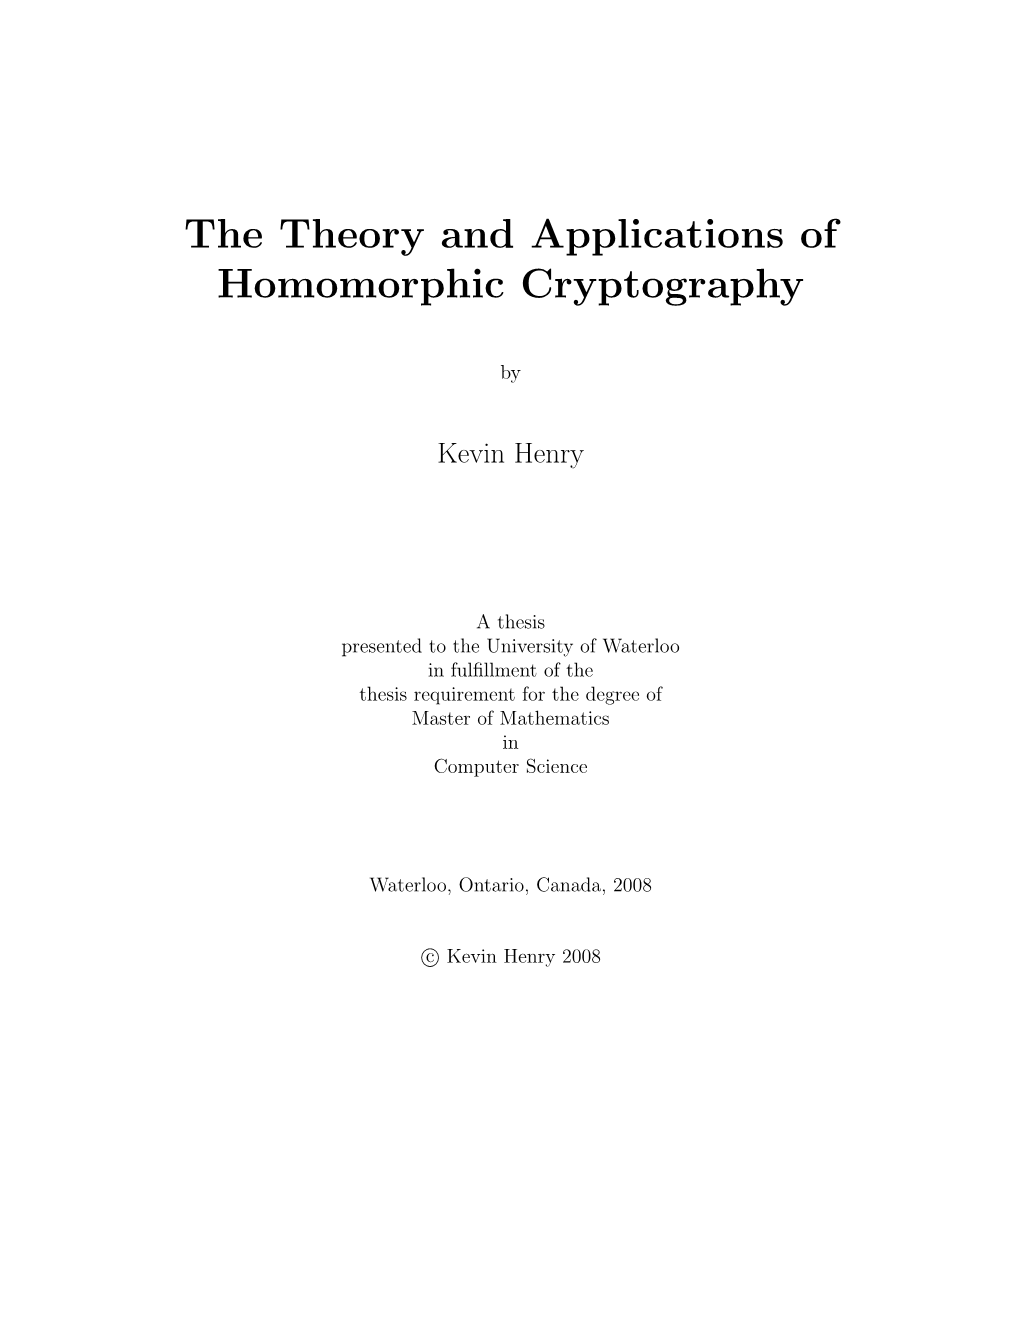 The Theory and Applications of Homomorphic Cryptography